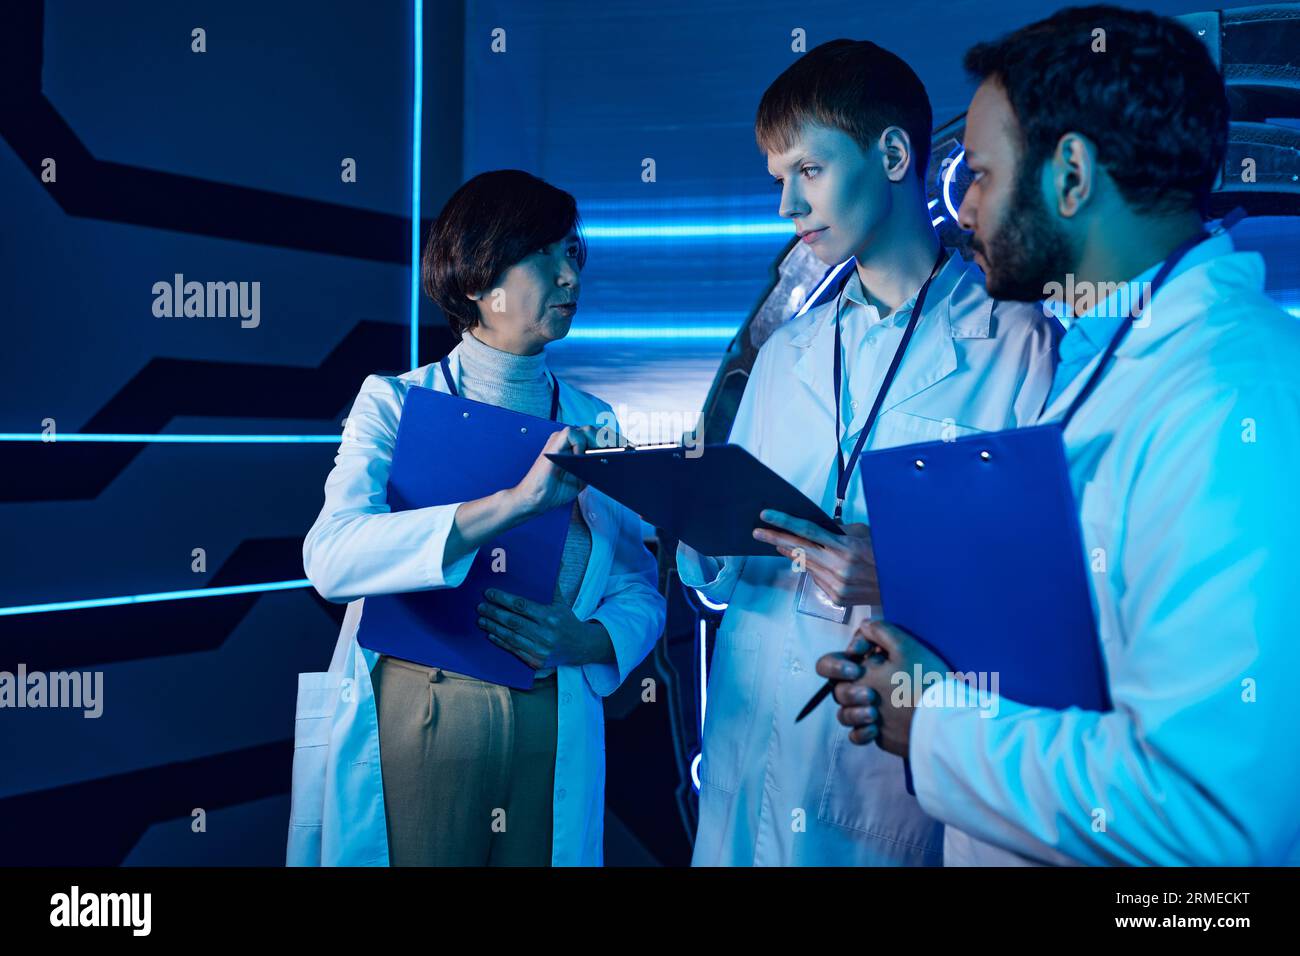 Female scientist passionately explains tasks to interns within a futuristic science center Stock Photo